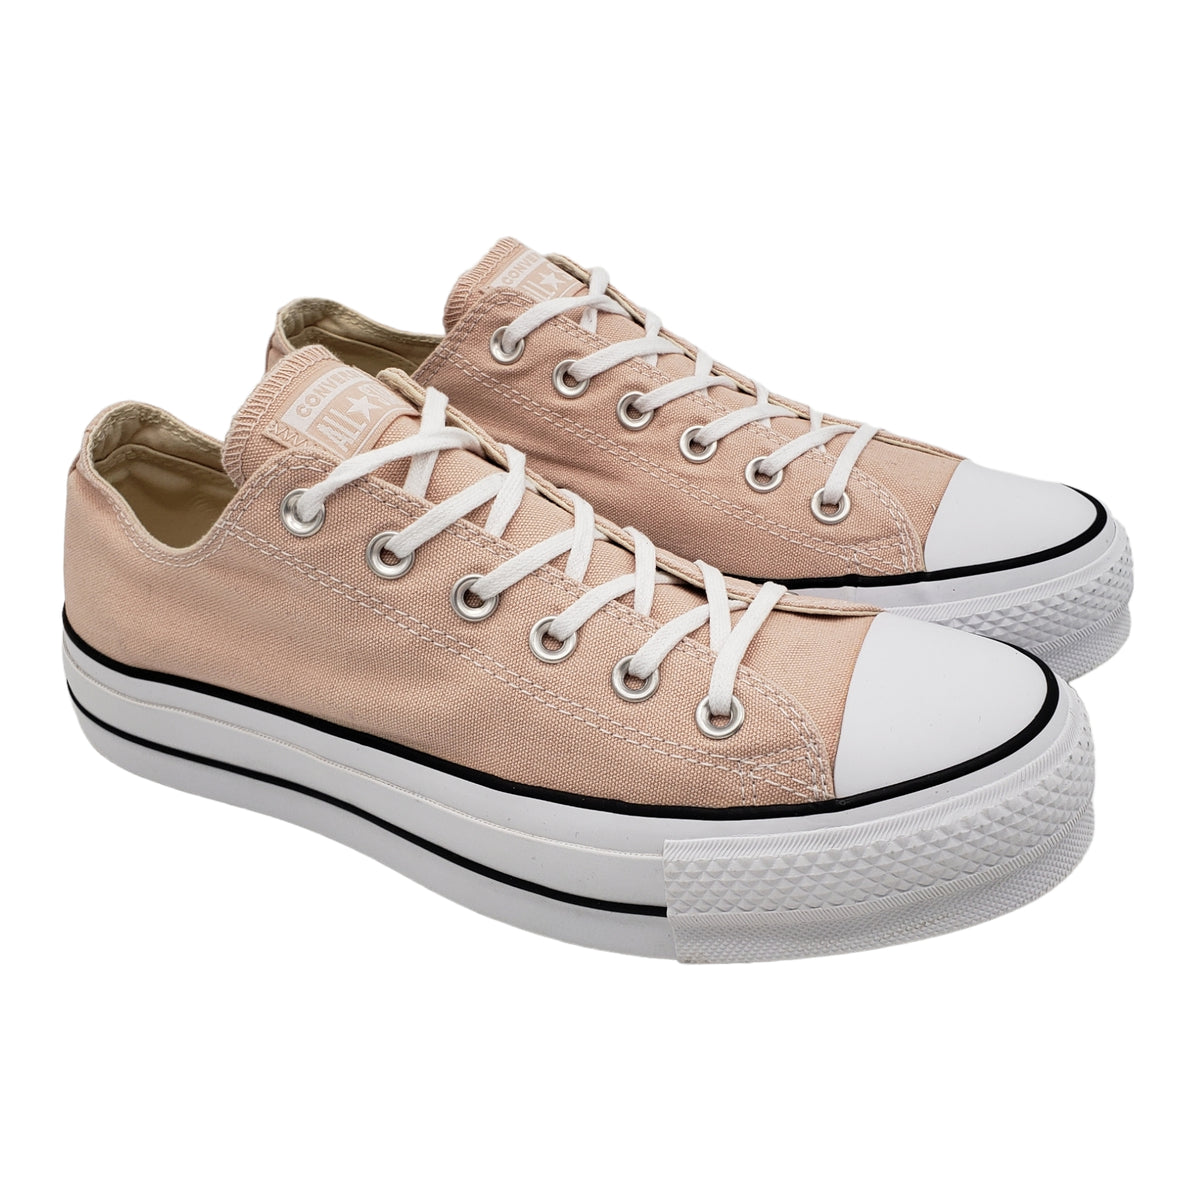 Converse All Star Apricot Pink Trainers